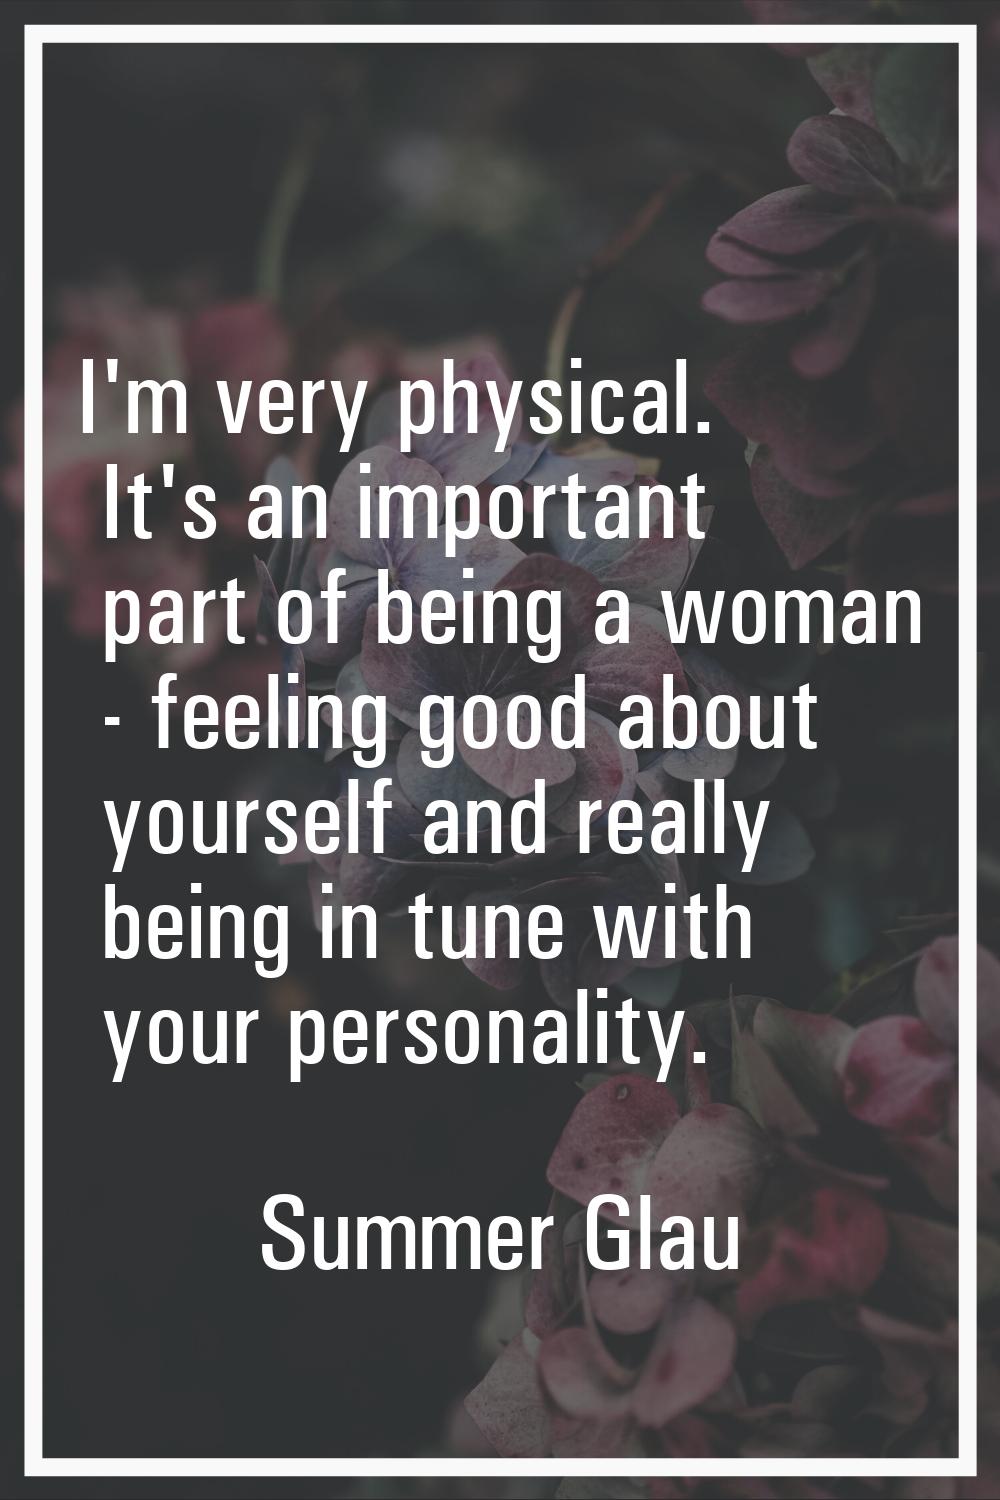 I'm very physical. It's an important part of being a woman - feeling good about yourself and really